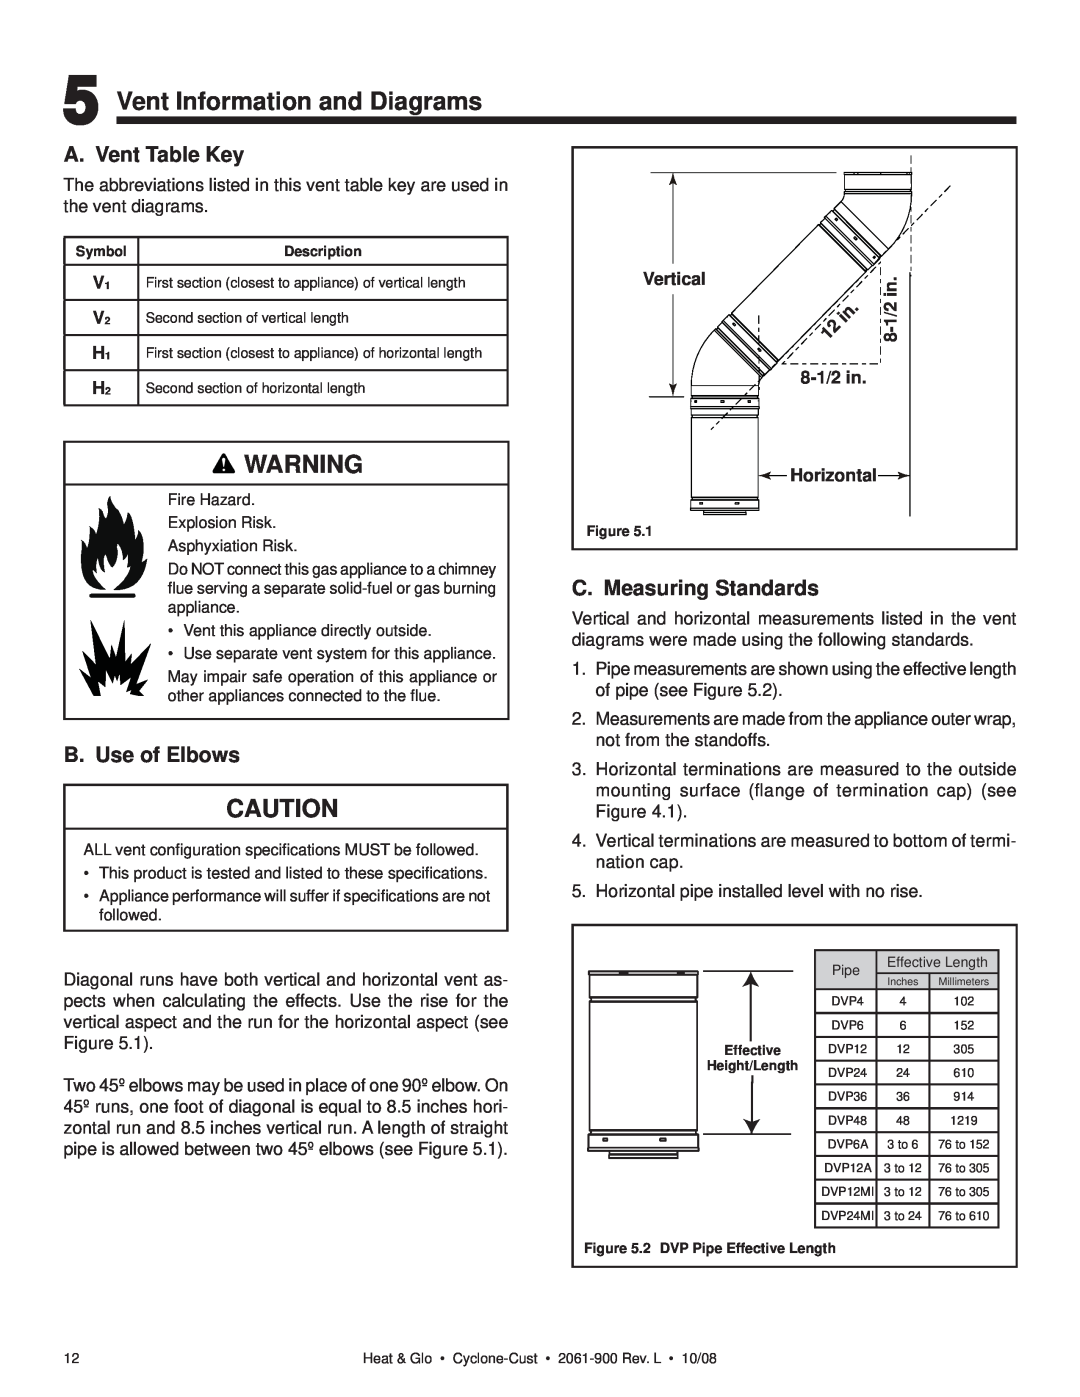 Hearth and Home Technologies Cyclone-Cust owner manual Vent Information and Diagrams, A. Vent Table Key, B. Use of Elbows 